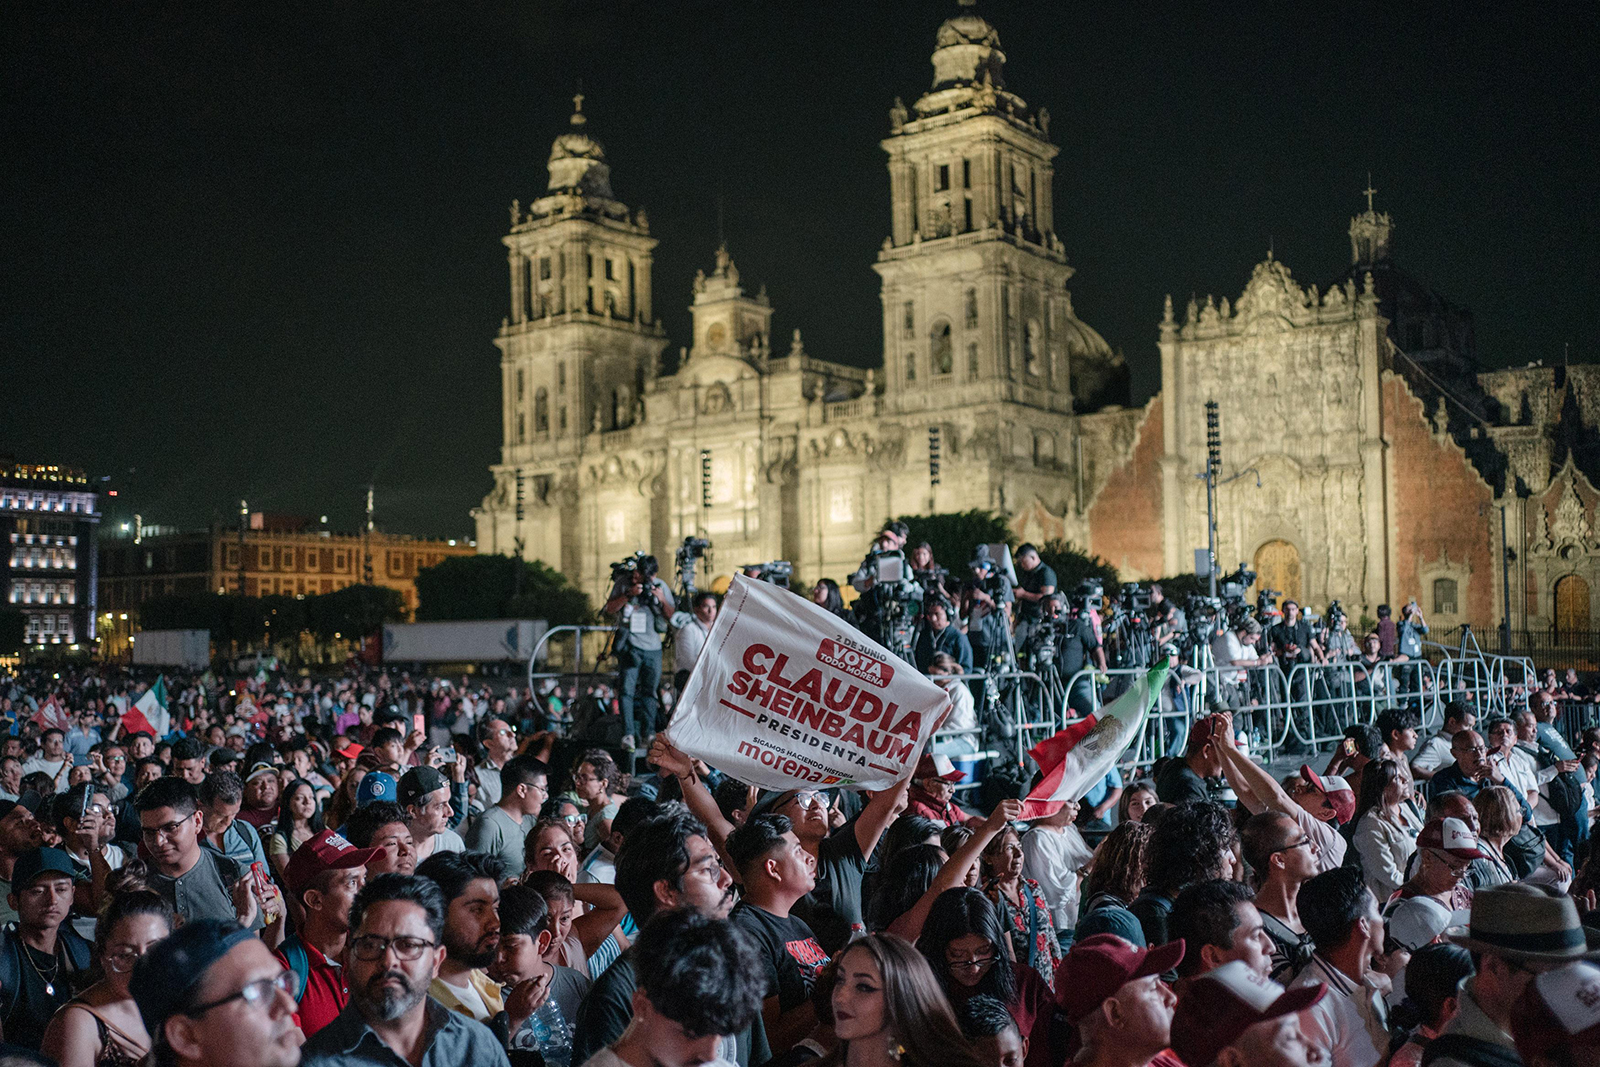 Supporters of Claudia Sheinbaum, former mayor of Mexico City and presidential candidate for the Morena party, celebrate during an election night rally at Zocalo Plaza in Mexico City, Mexico, on Sunday.